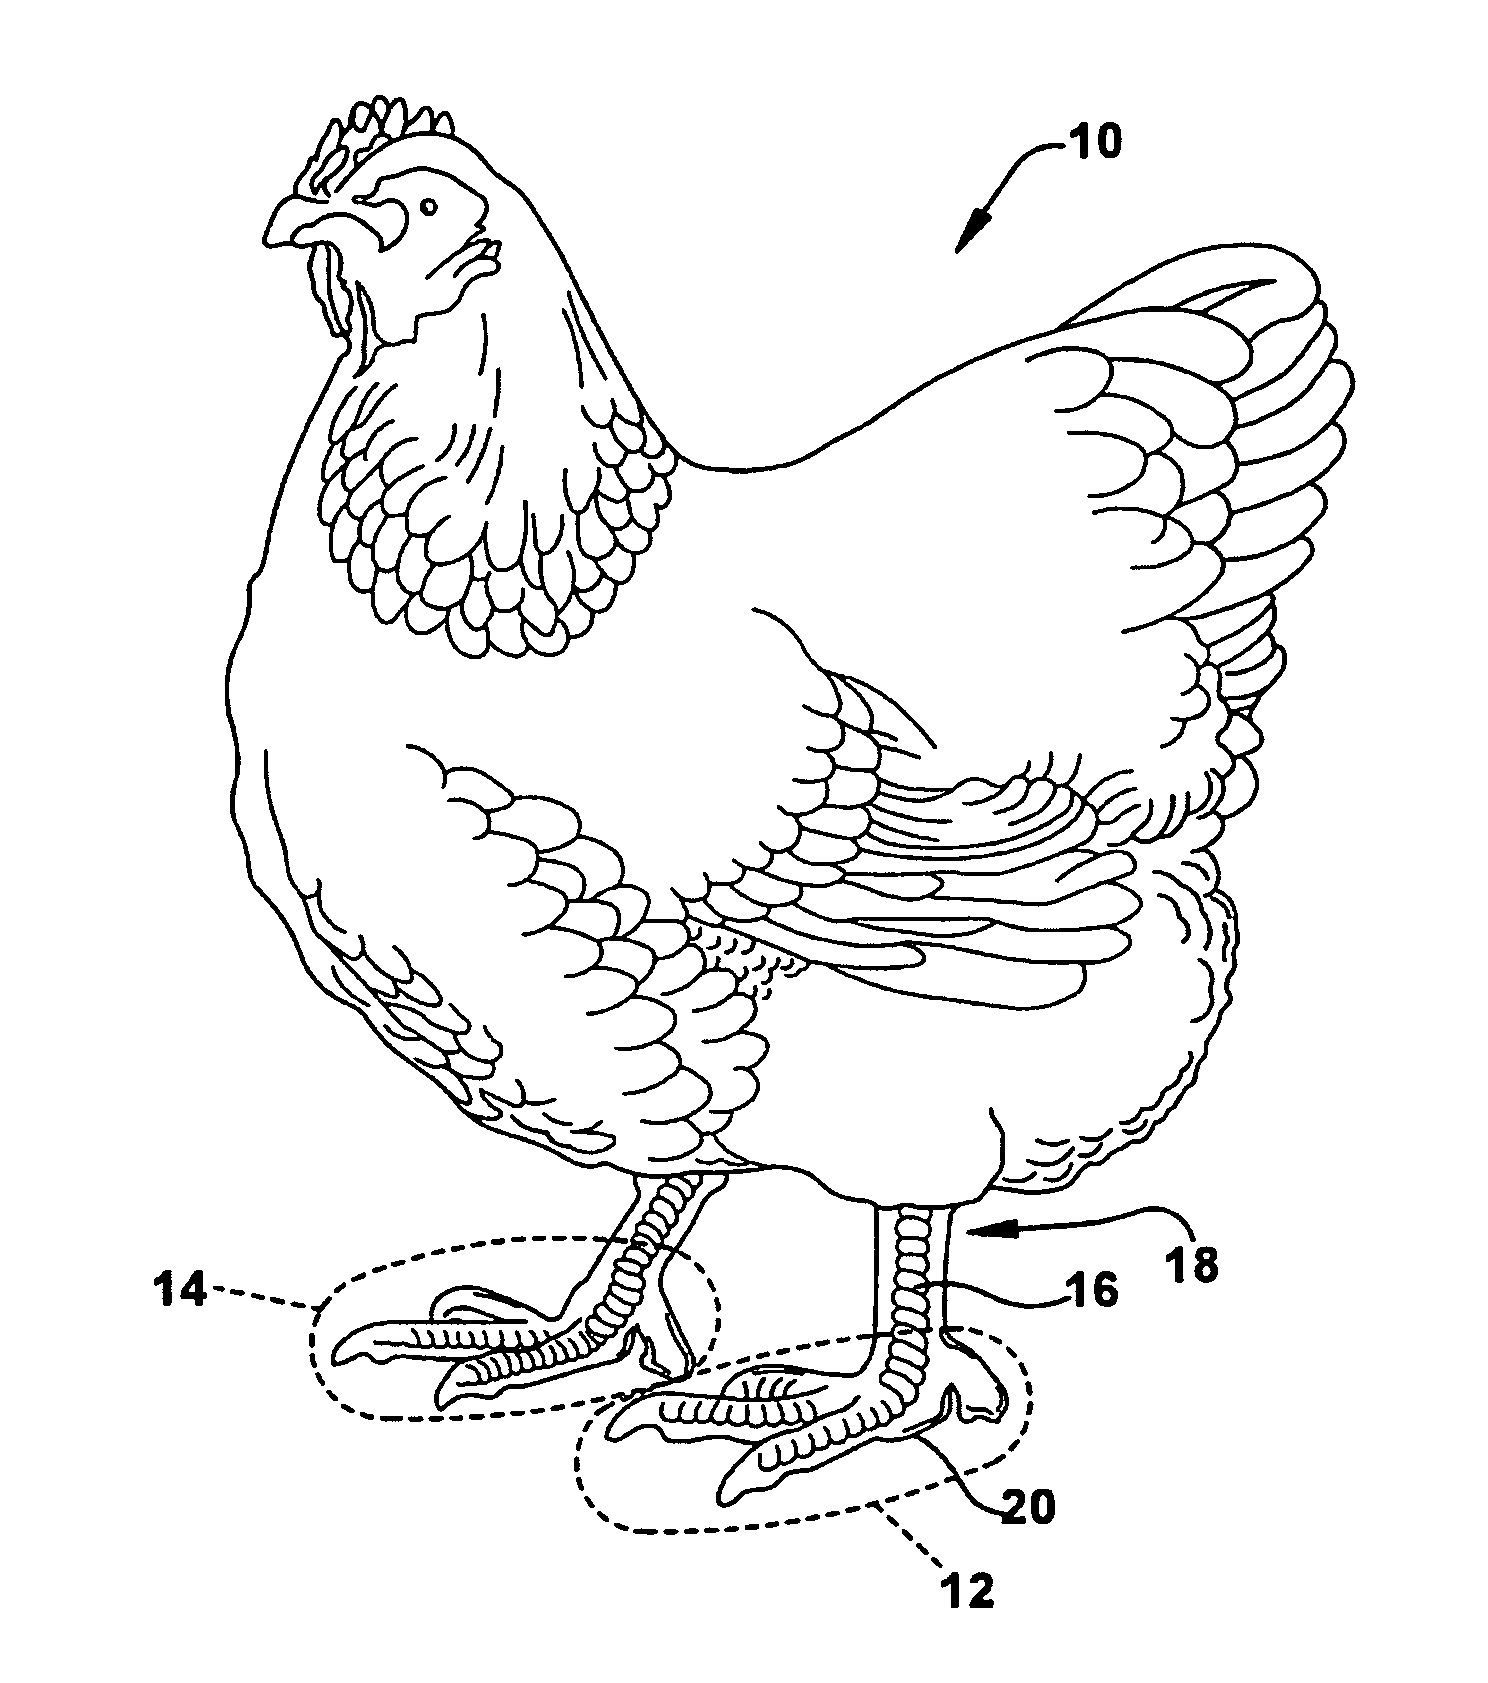 Method of trimming portion of chicken paw metatarsal pad using power operated rotary knife